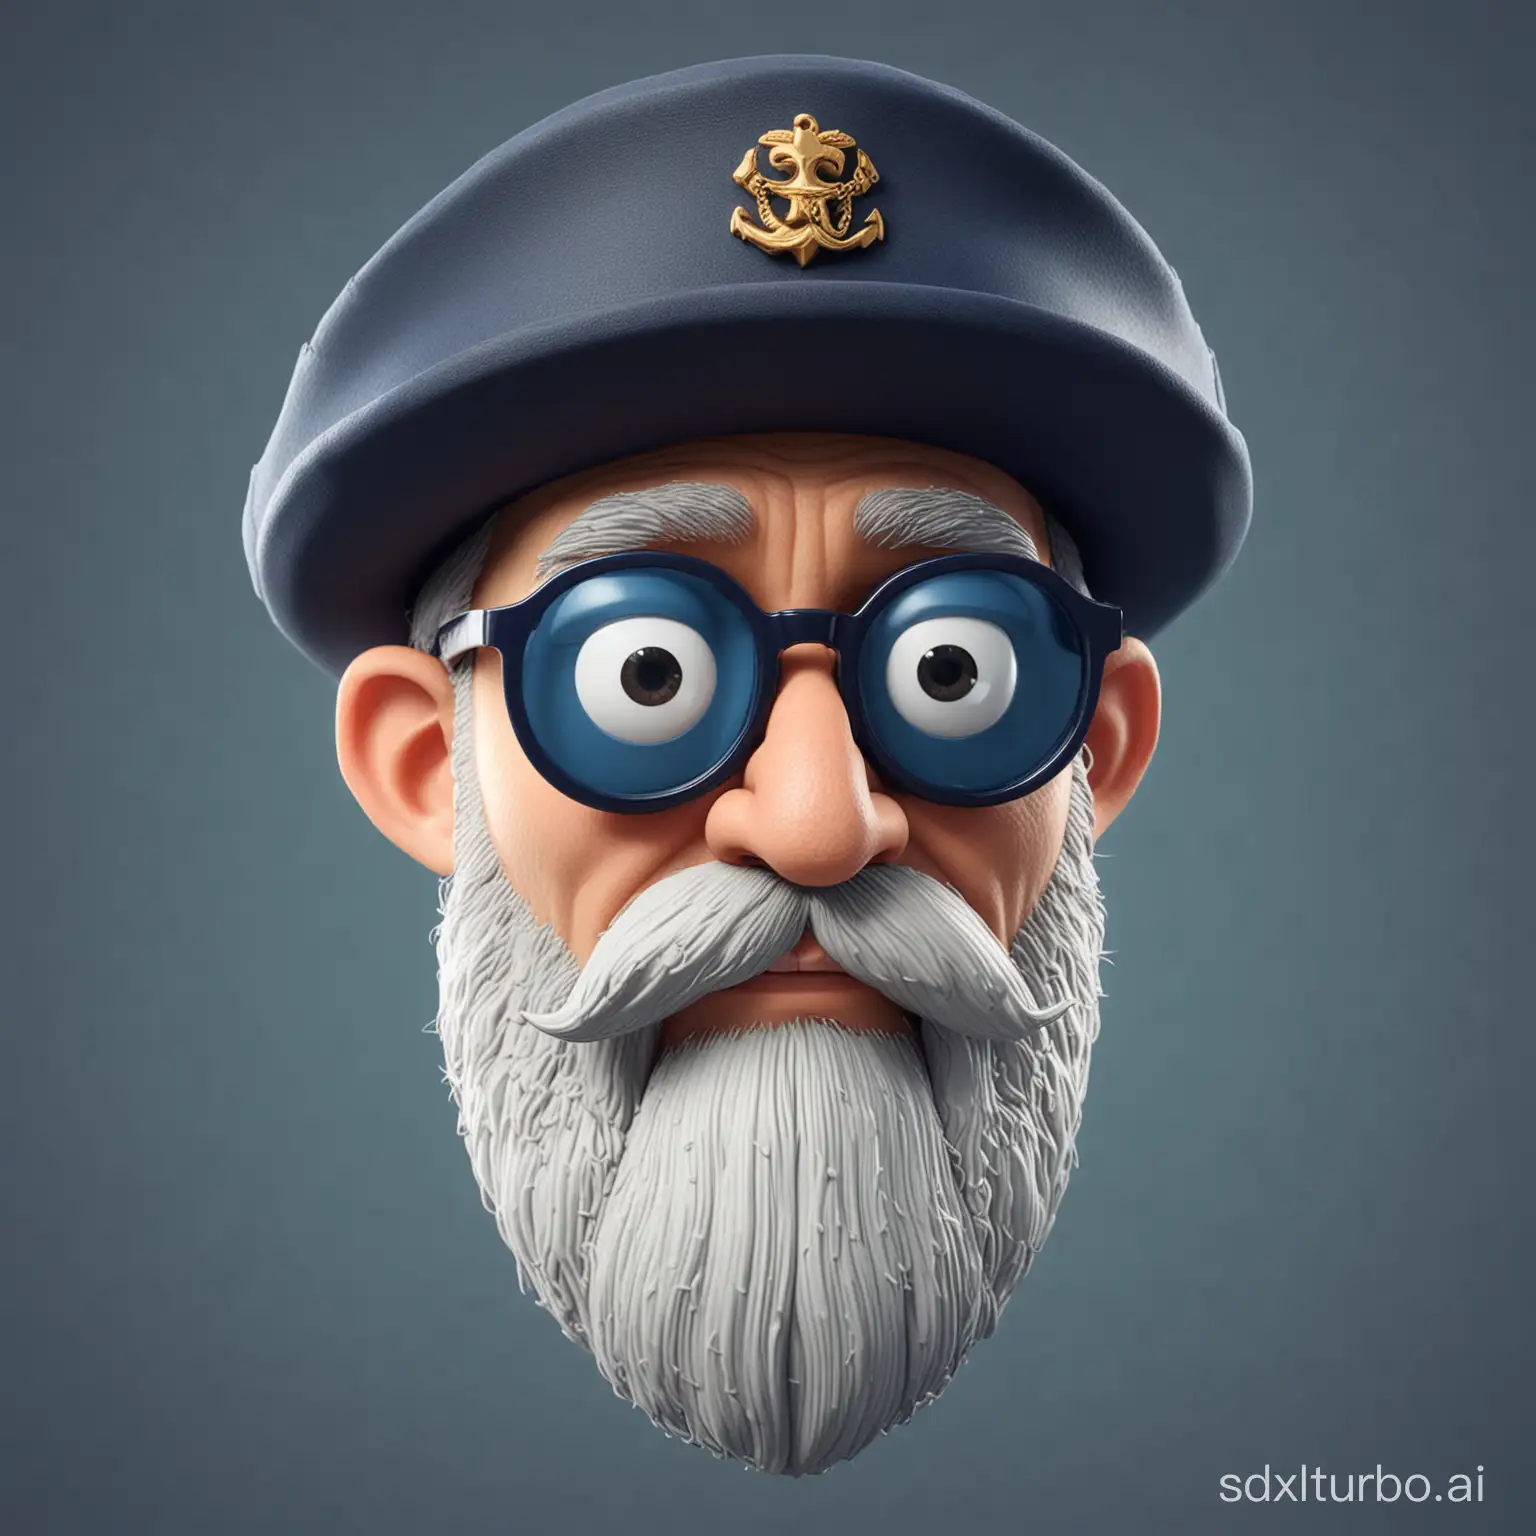 Cartoonish-3D-Head-Model-of-a-Bearded-Man-with-Navy-Hat-and-Round-Sunglasses